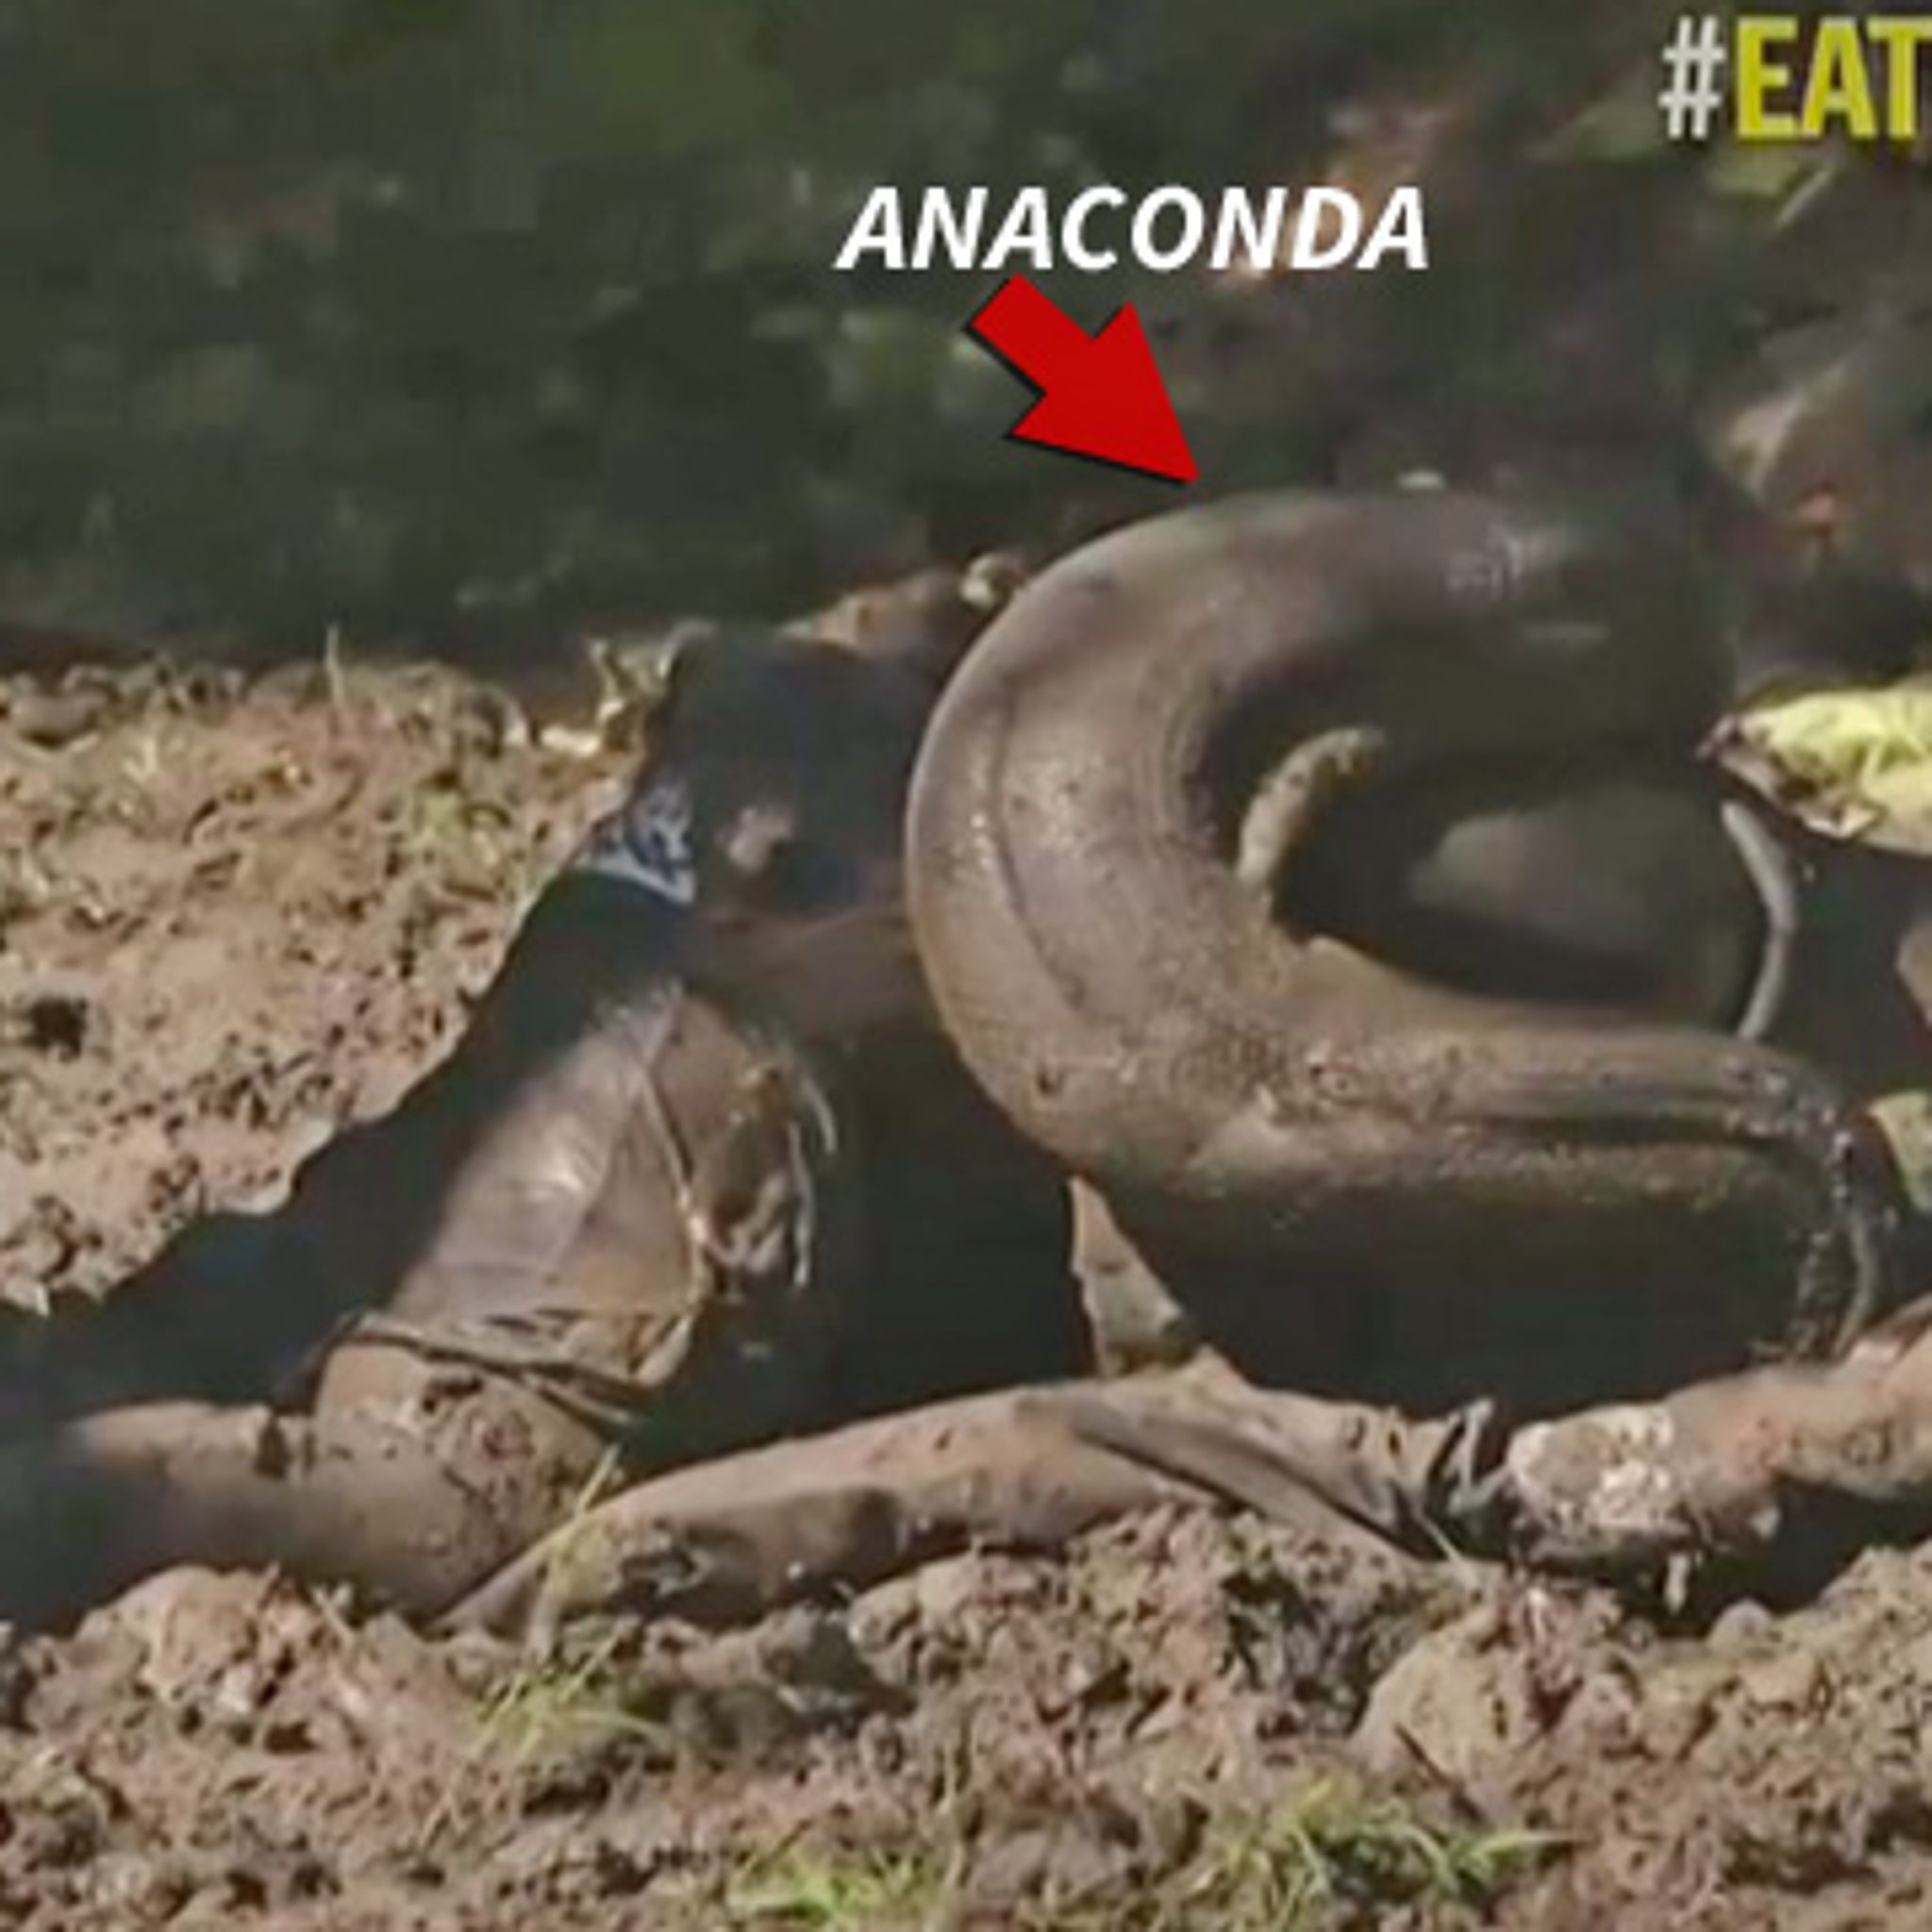 Eaten Alive Anaconda Used In Failed Tv Stunt Was A Ringer